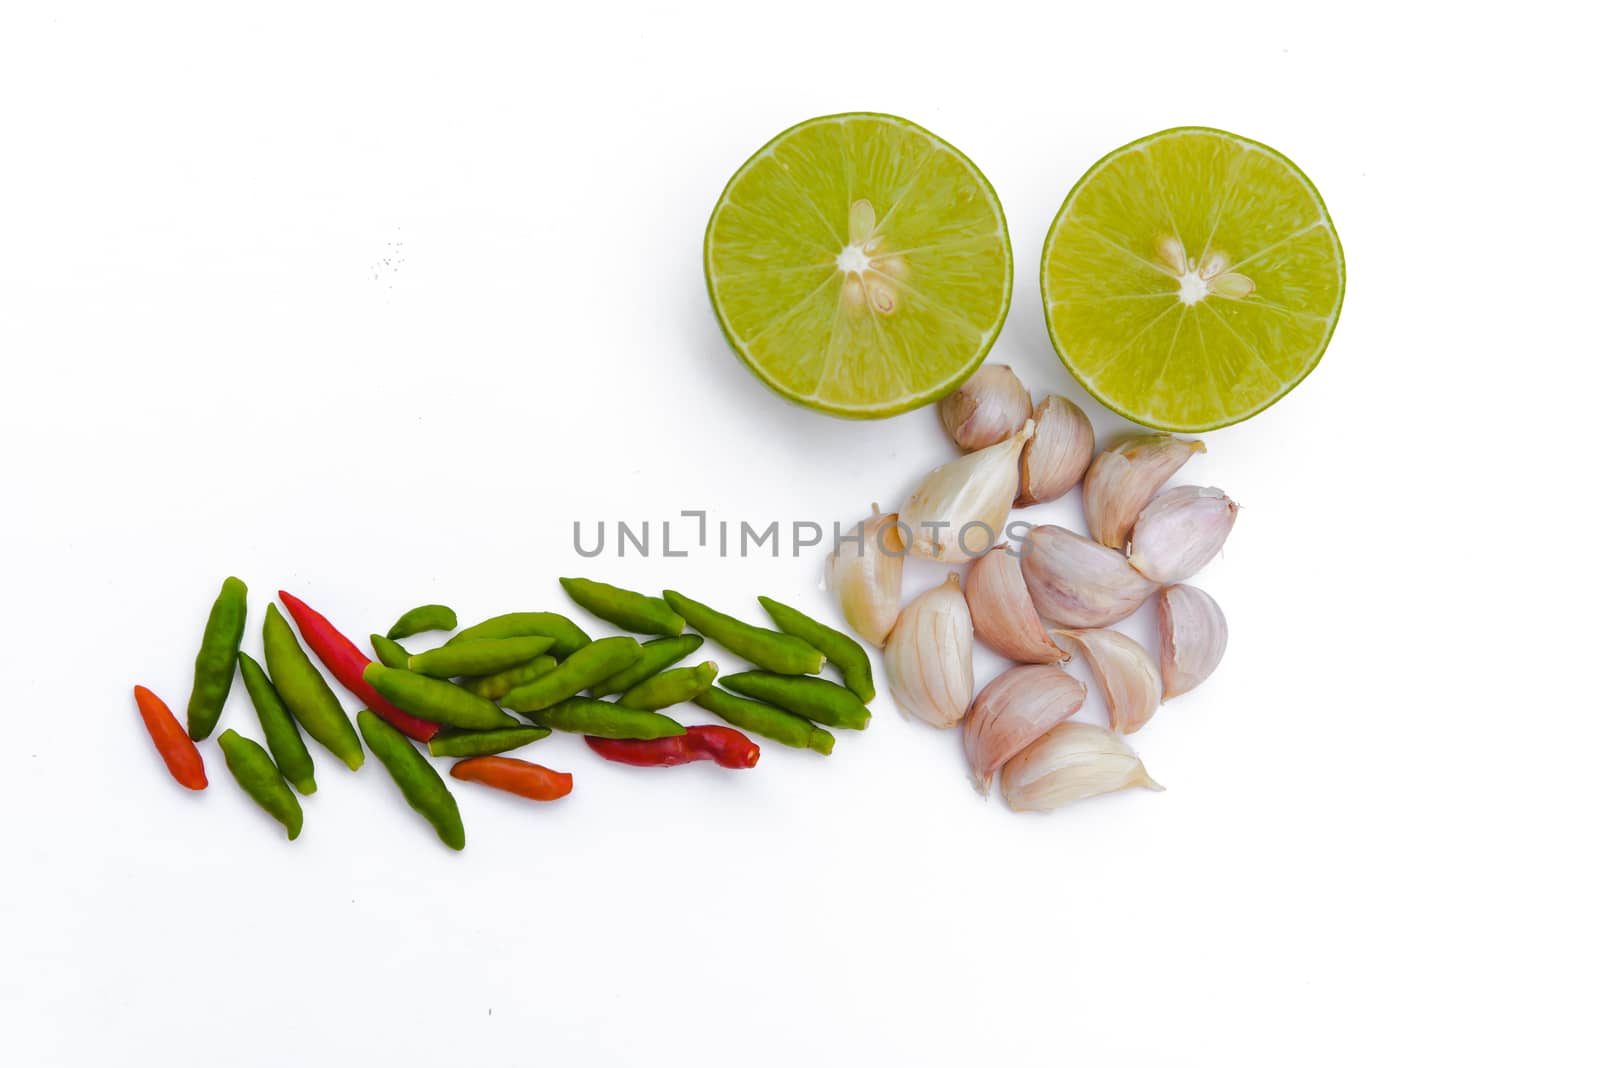 Chili peppers, garlic and lime on white background. Asian ingredients food